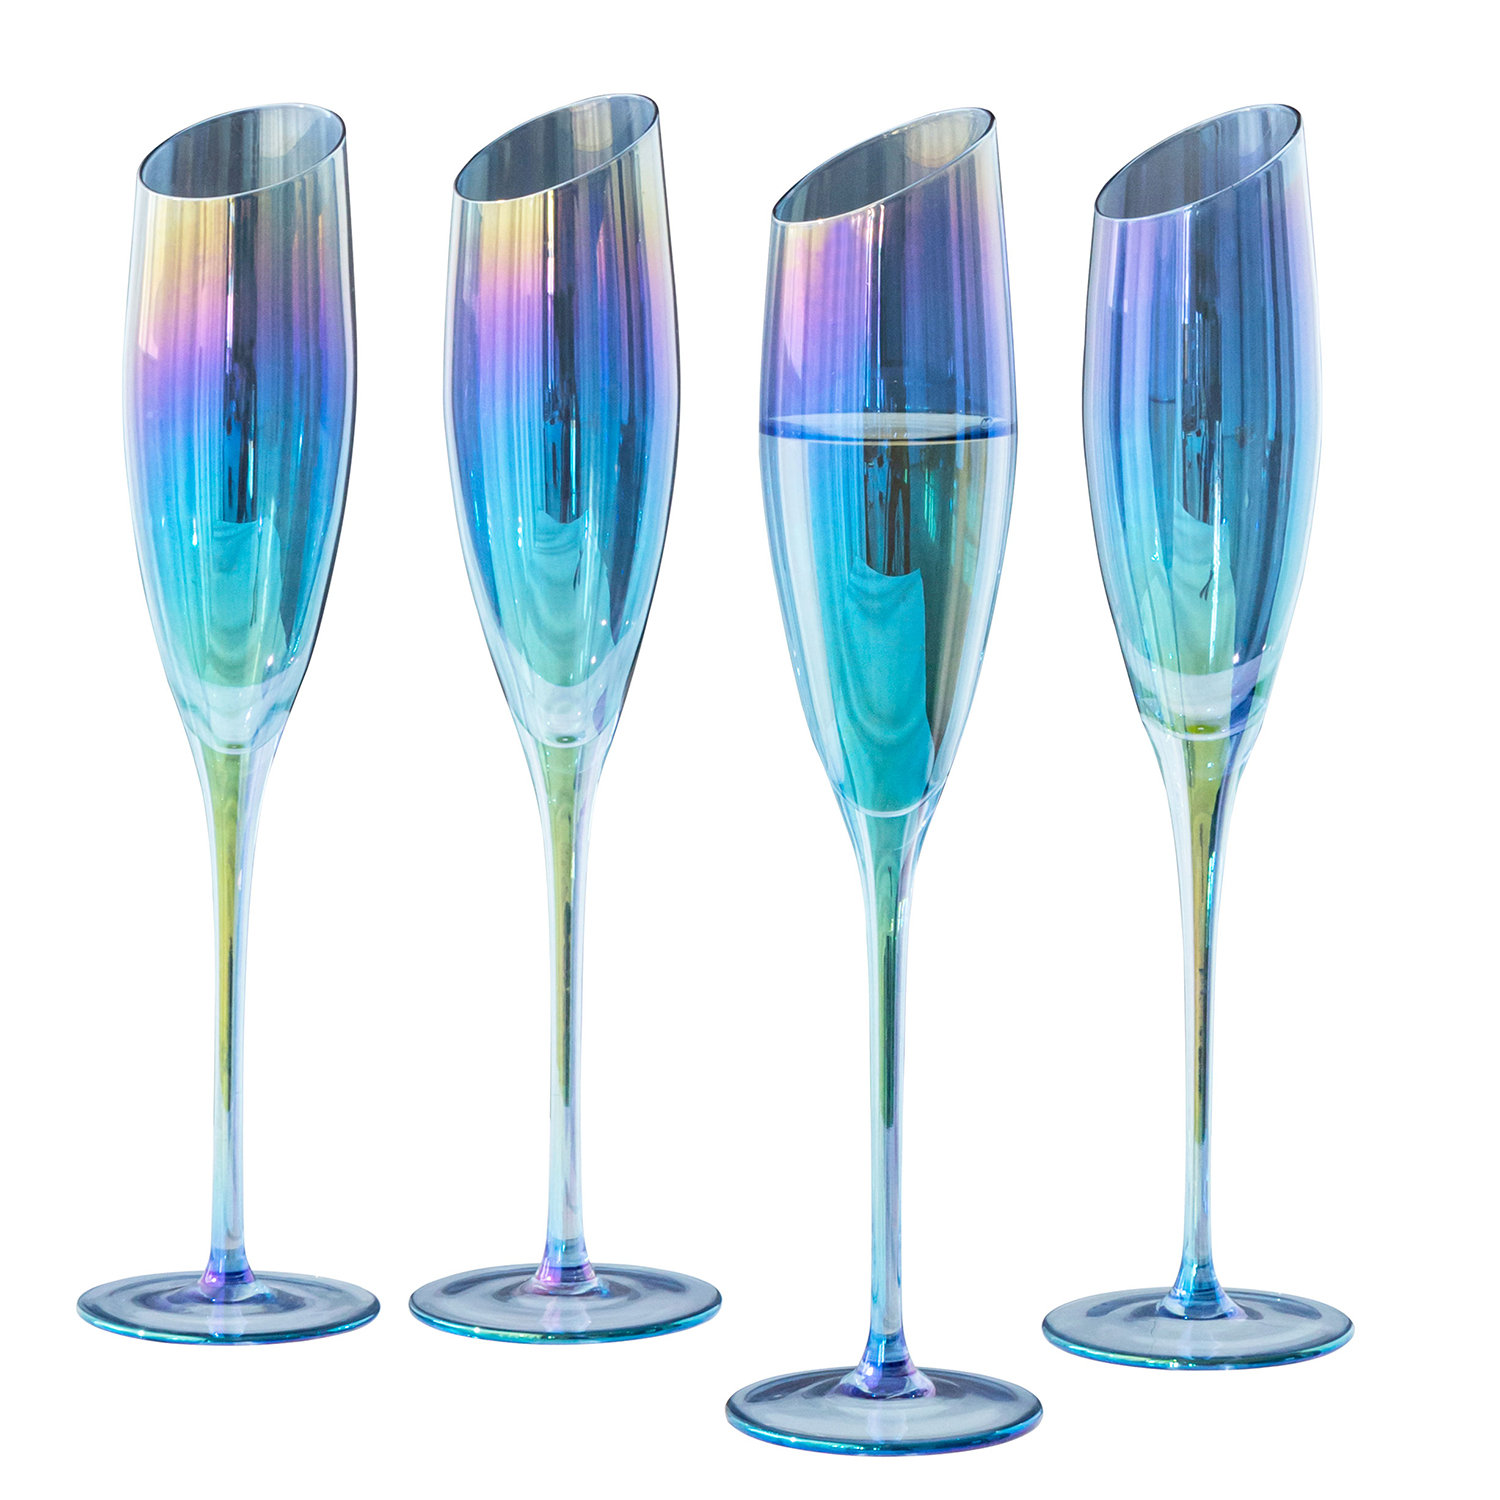 DATANYA Iridescent Champagne Flutes Set of 4, Crystal Lead-Free Hand Blown  Stemmed Rainbow Champagne…See more DATANYA Iridescent Champagne Flutes Set